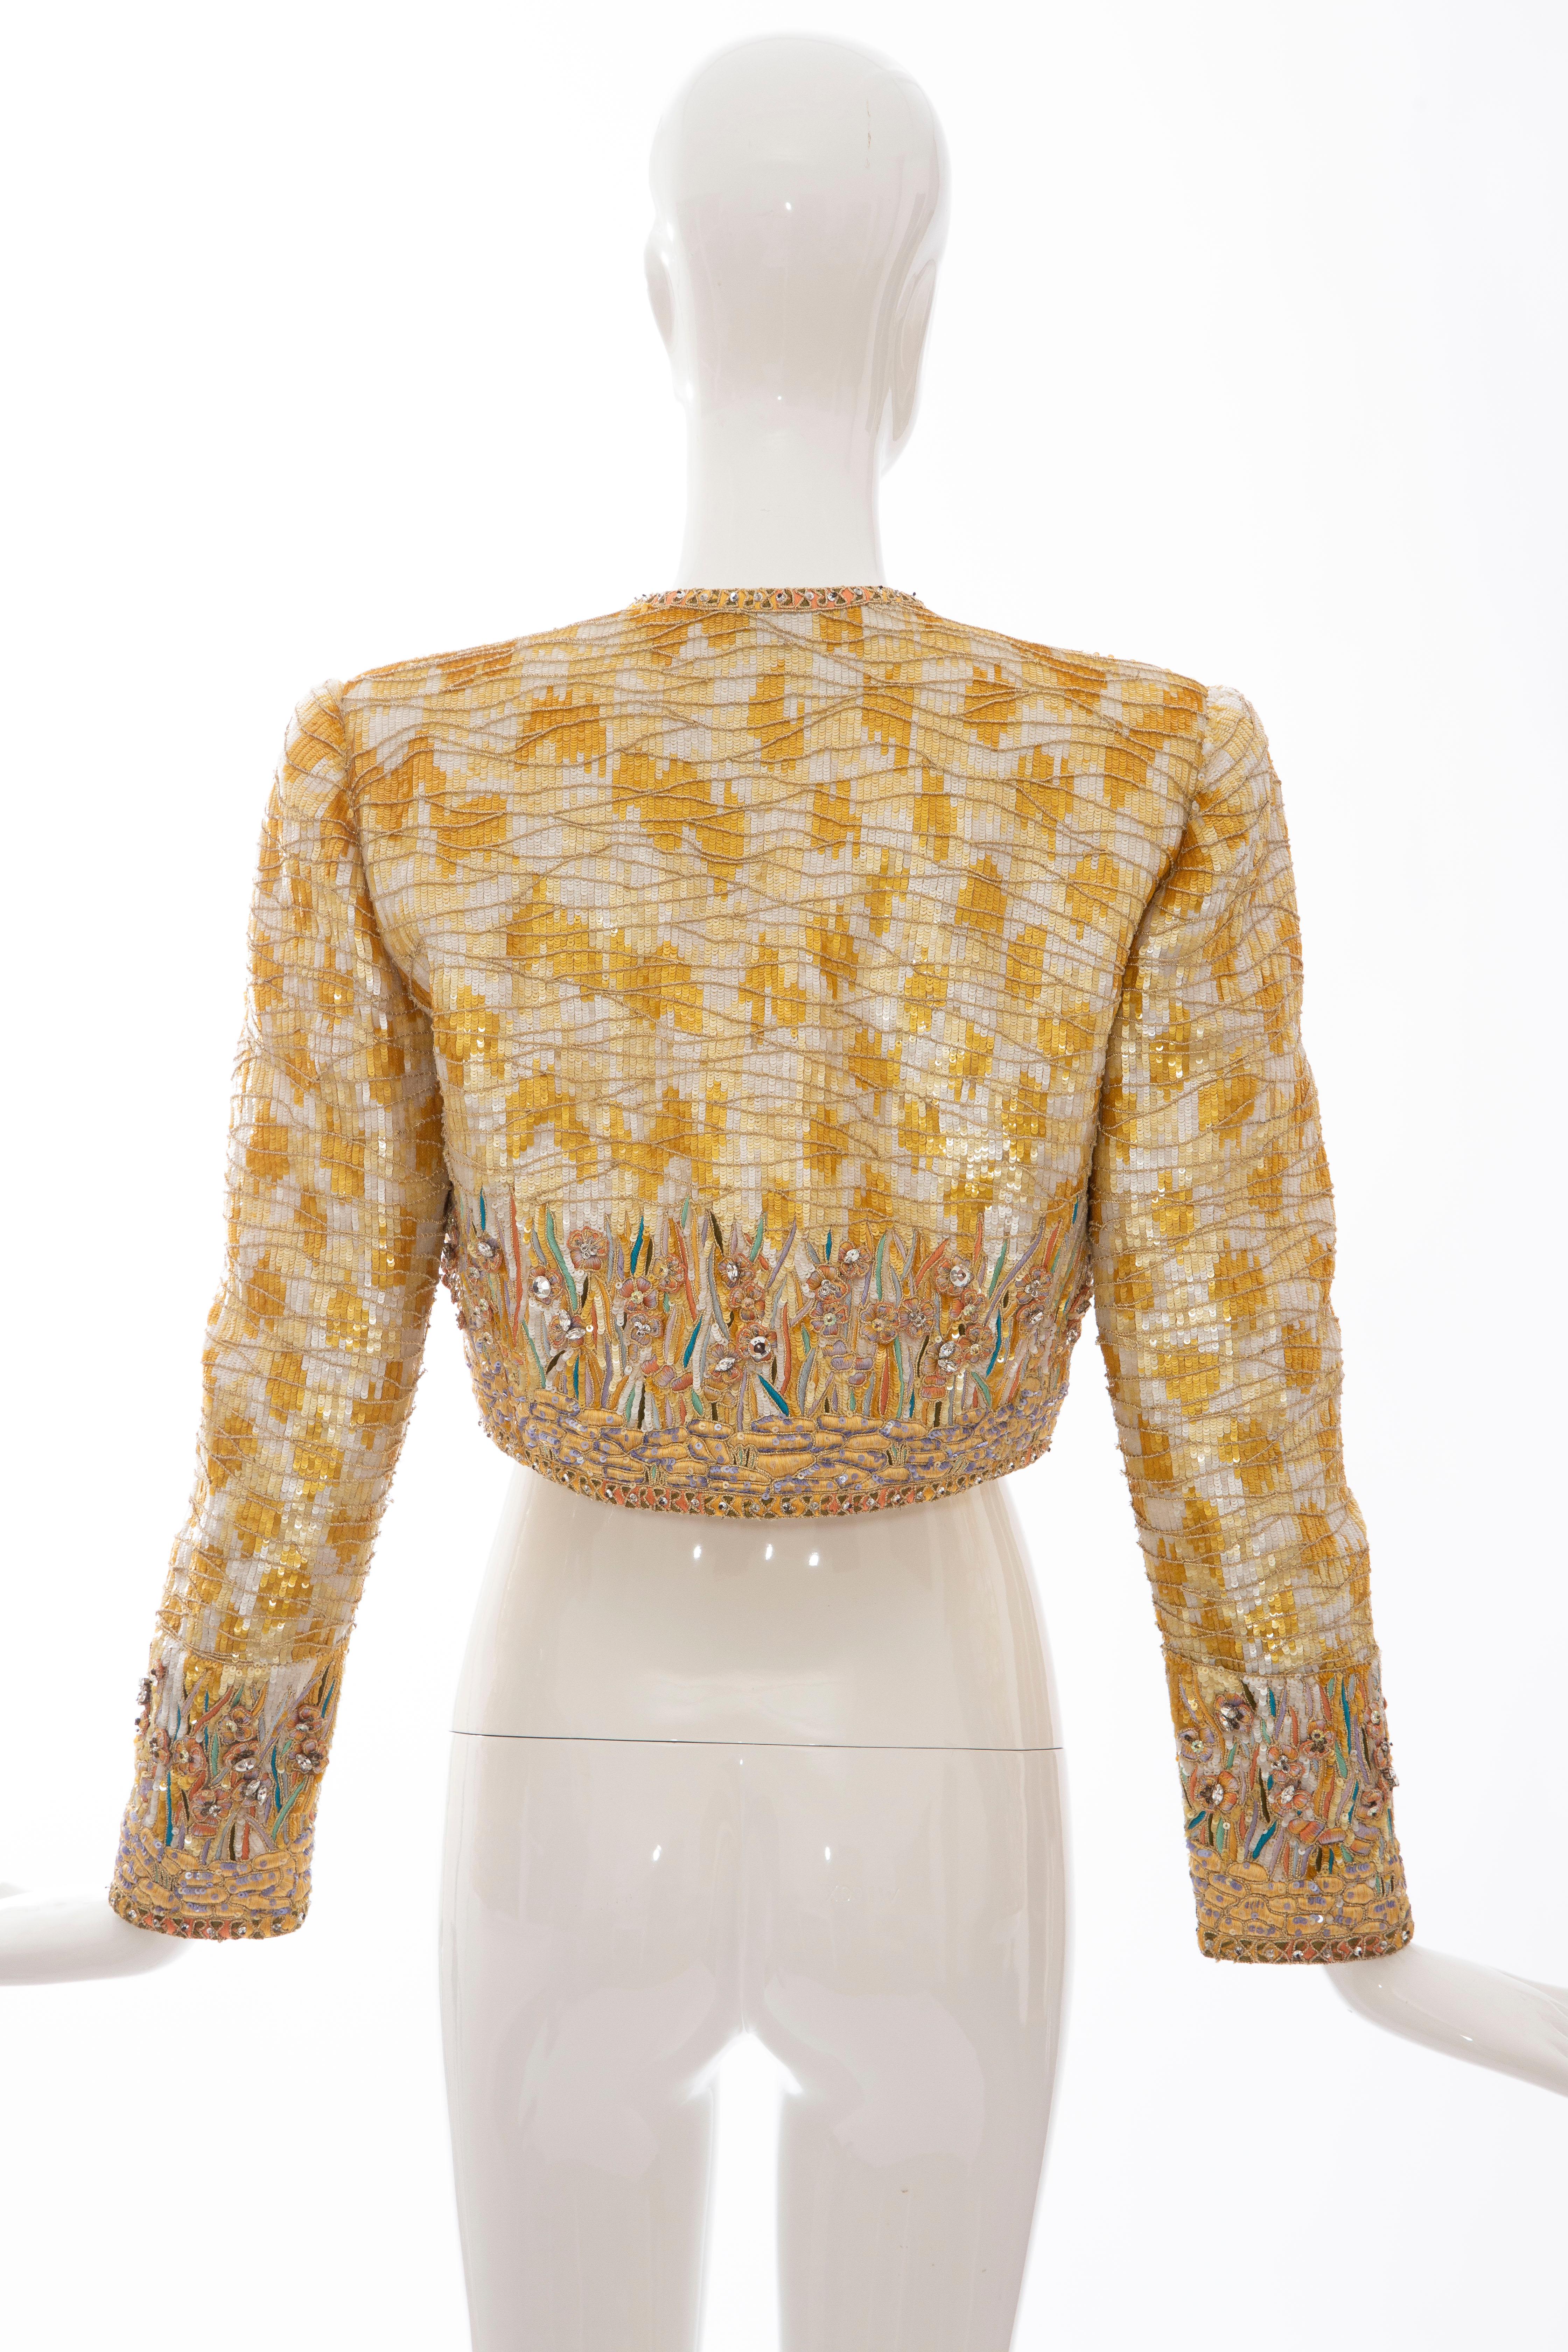 Mary McFadden Couture Silk Embroidered Sequins Diamanté Bolero Jacket, ca. 1980's For Sale 1